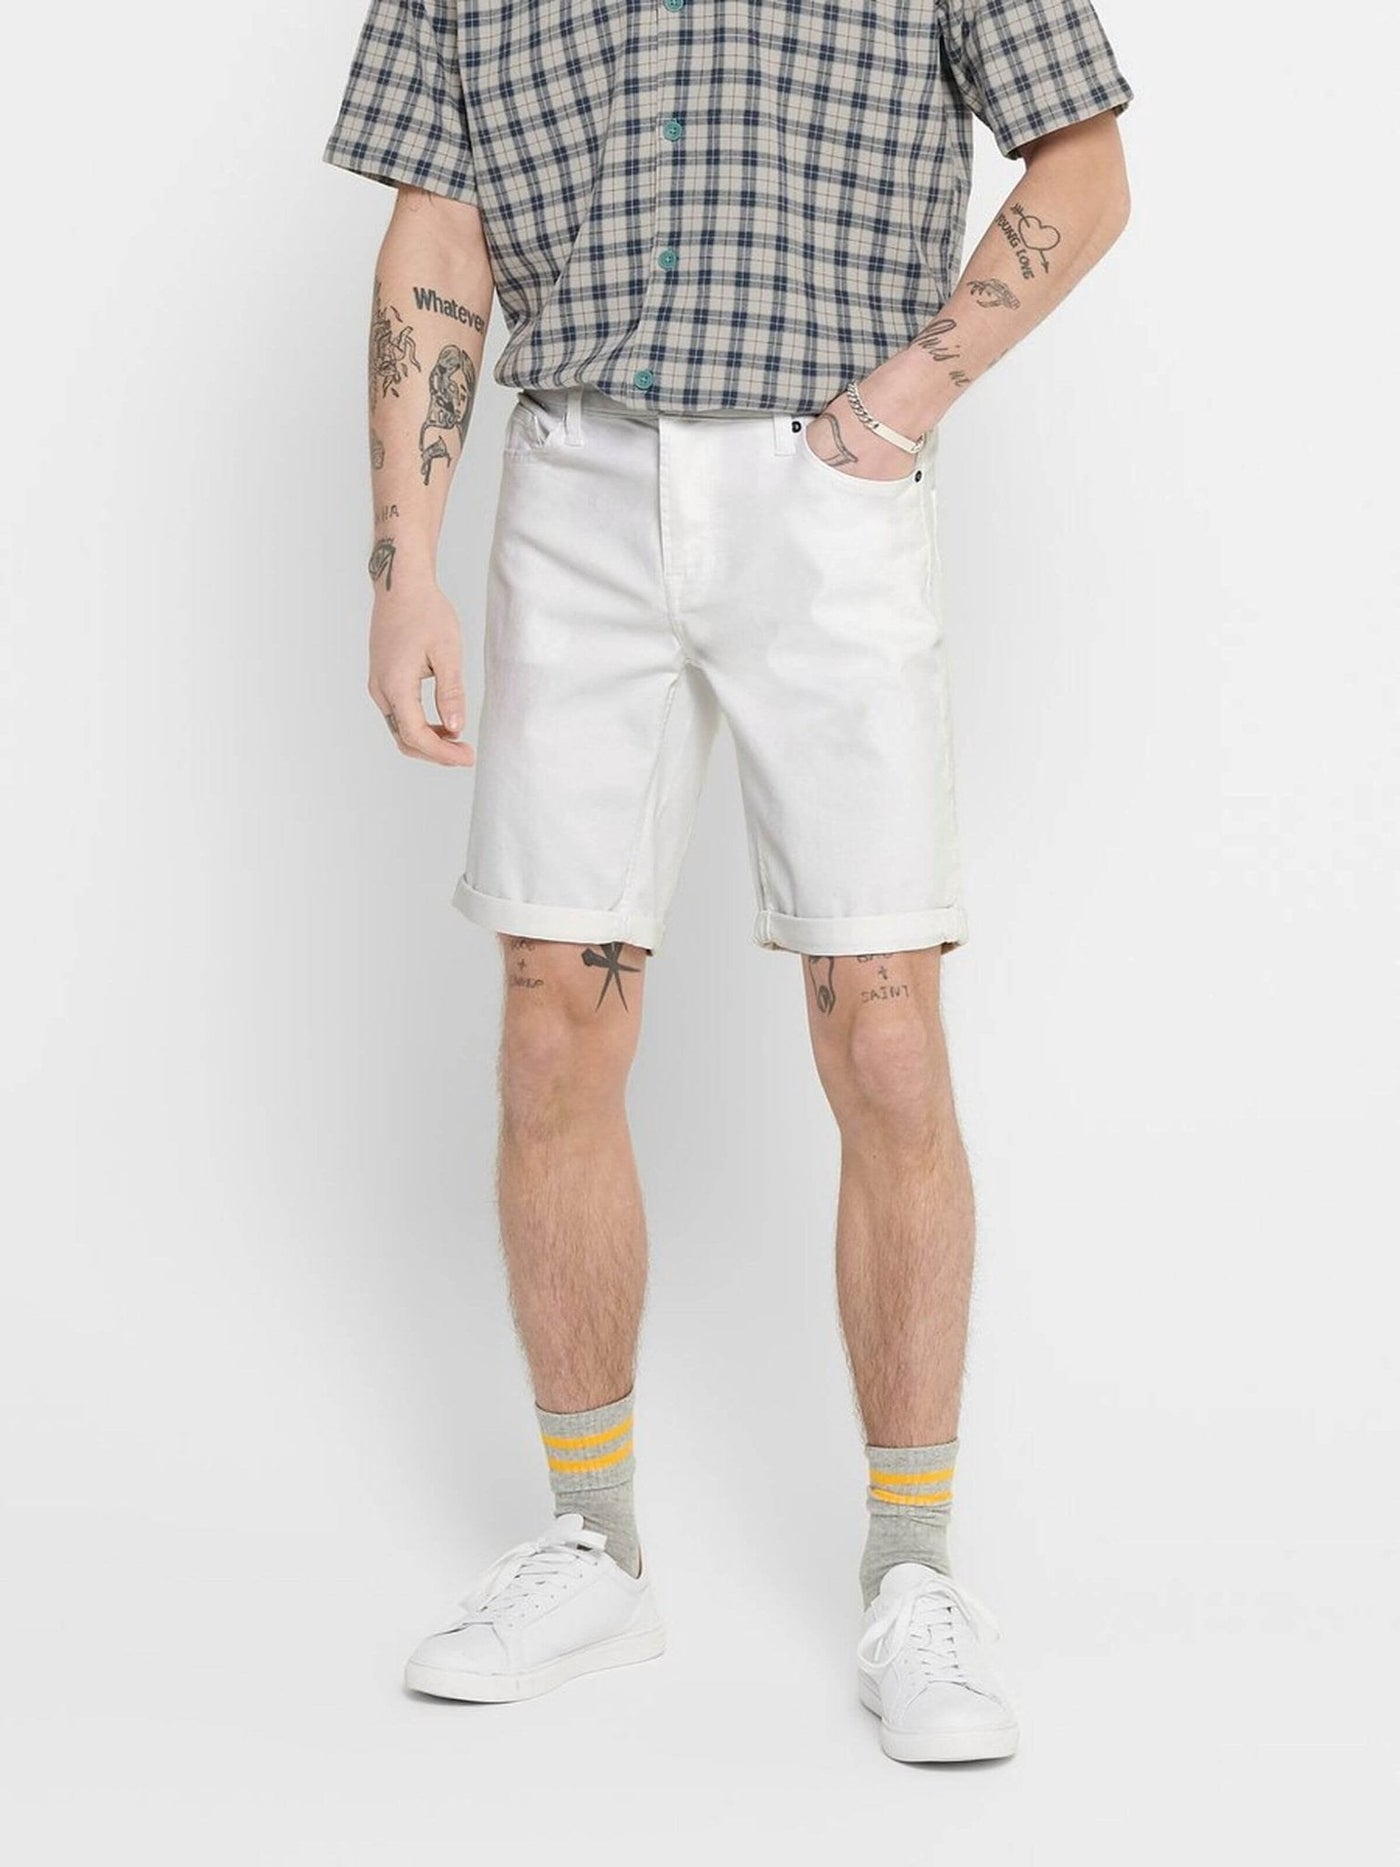 Ply Stretch Shorts - White - Only & Sons - White 3